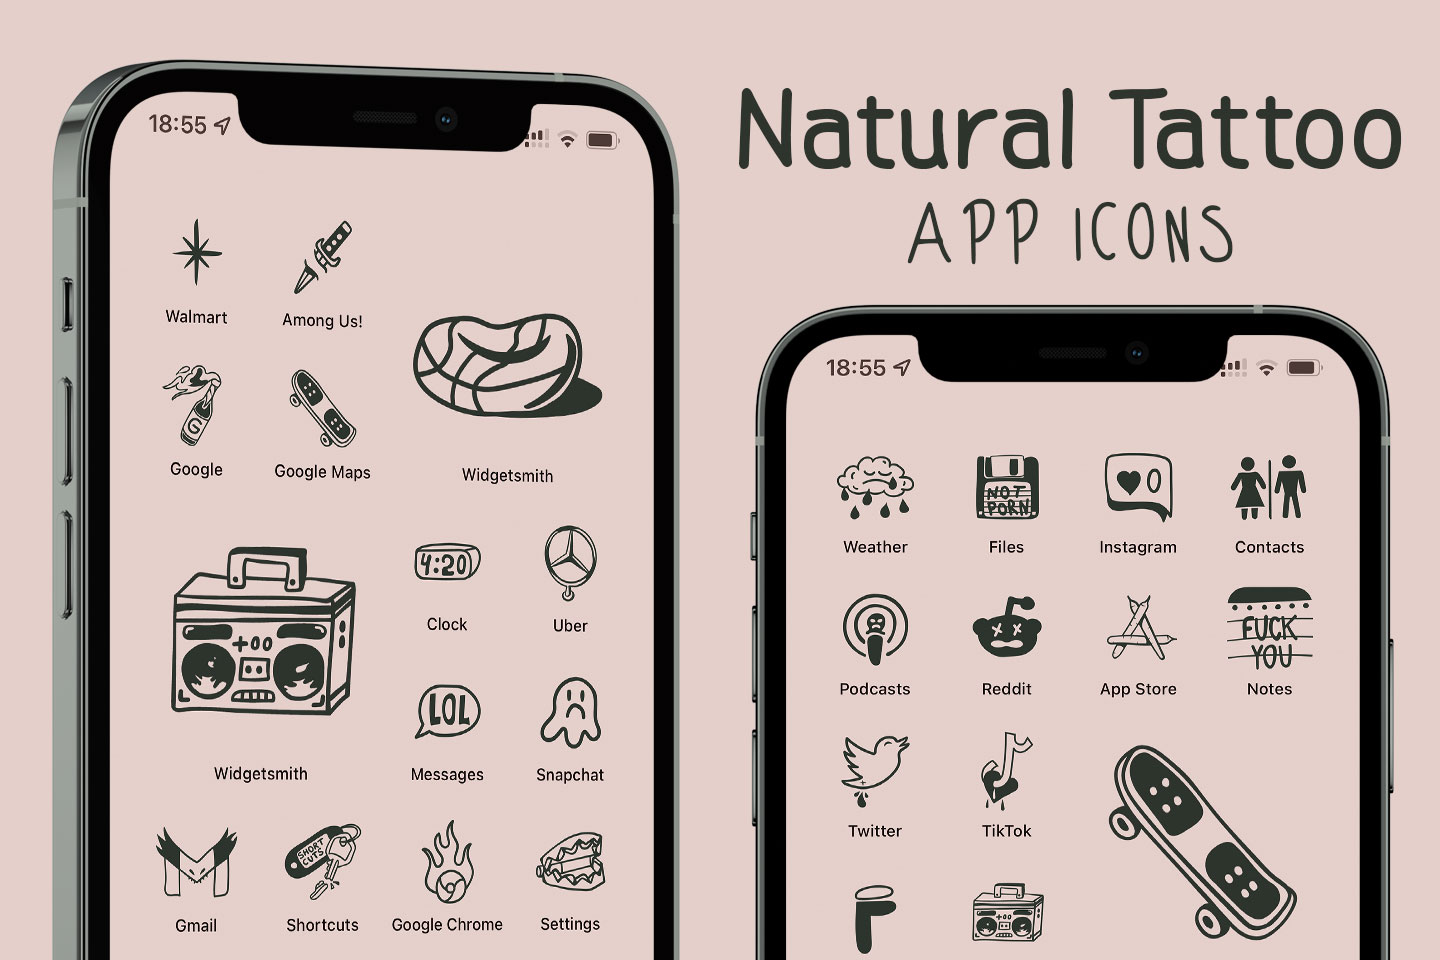 Tattoo Aesthetic App Icons - FREE iPhone App Icons Collection